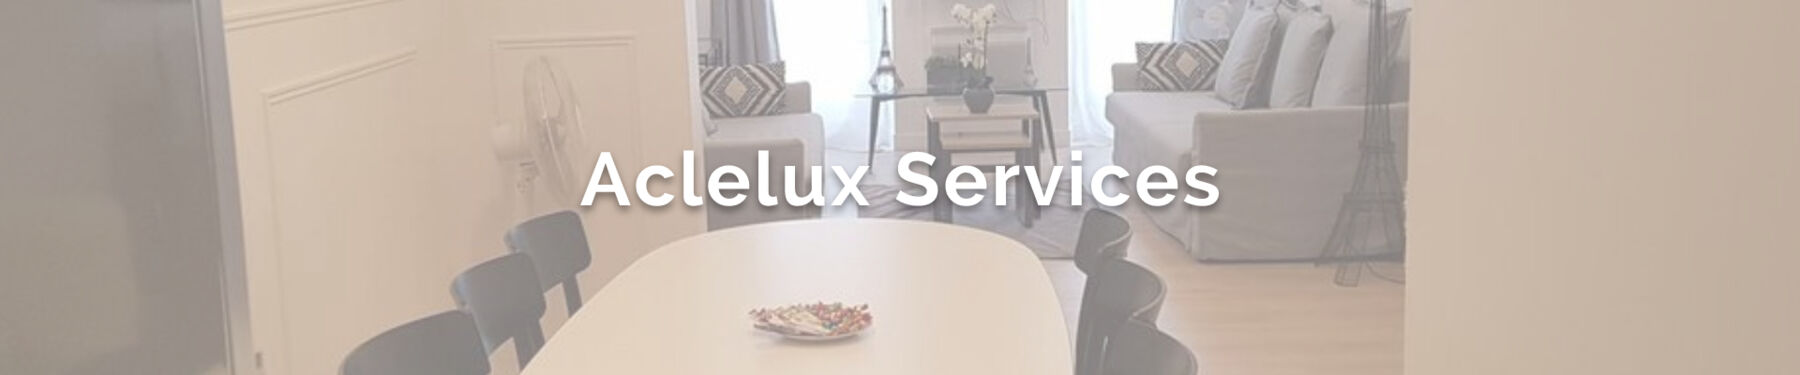 Aclelux Services